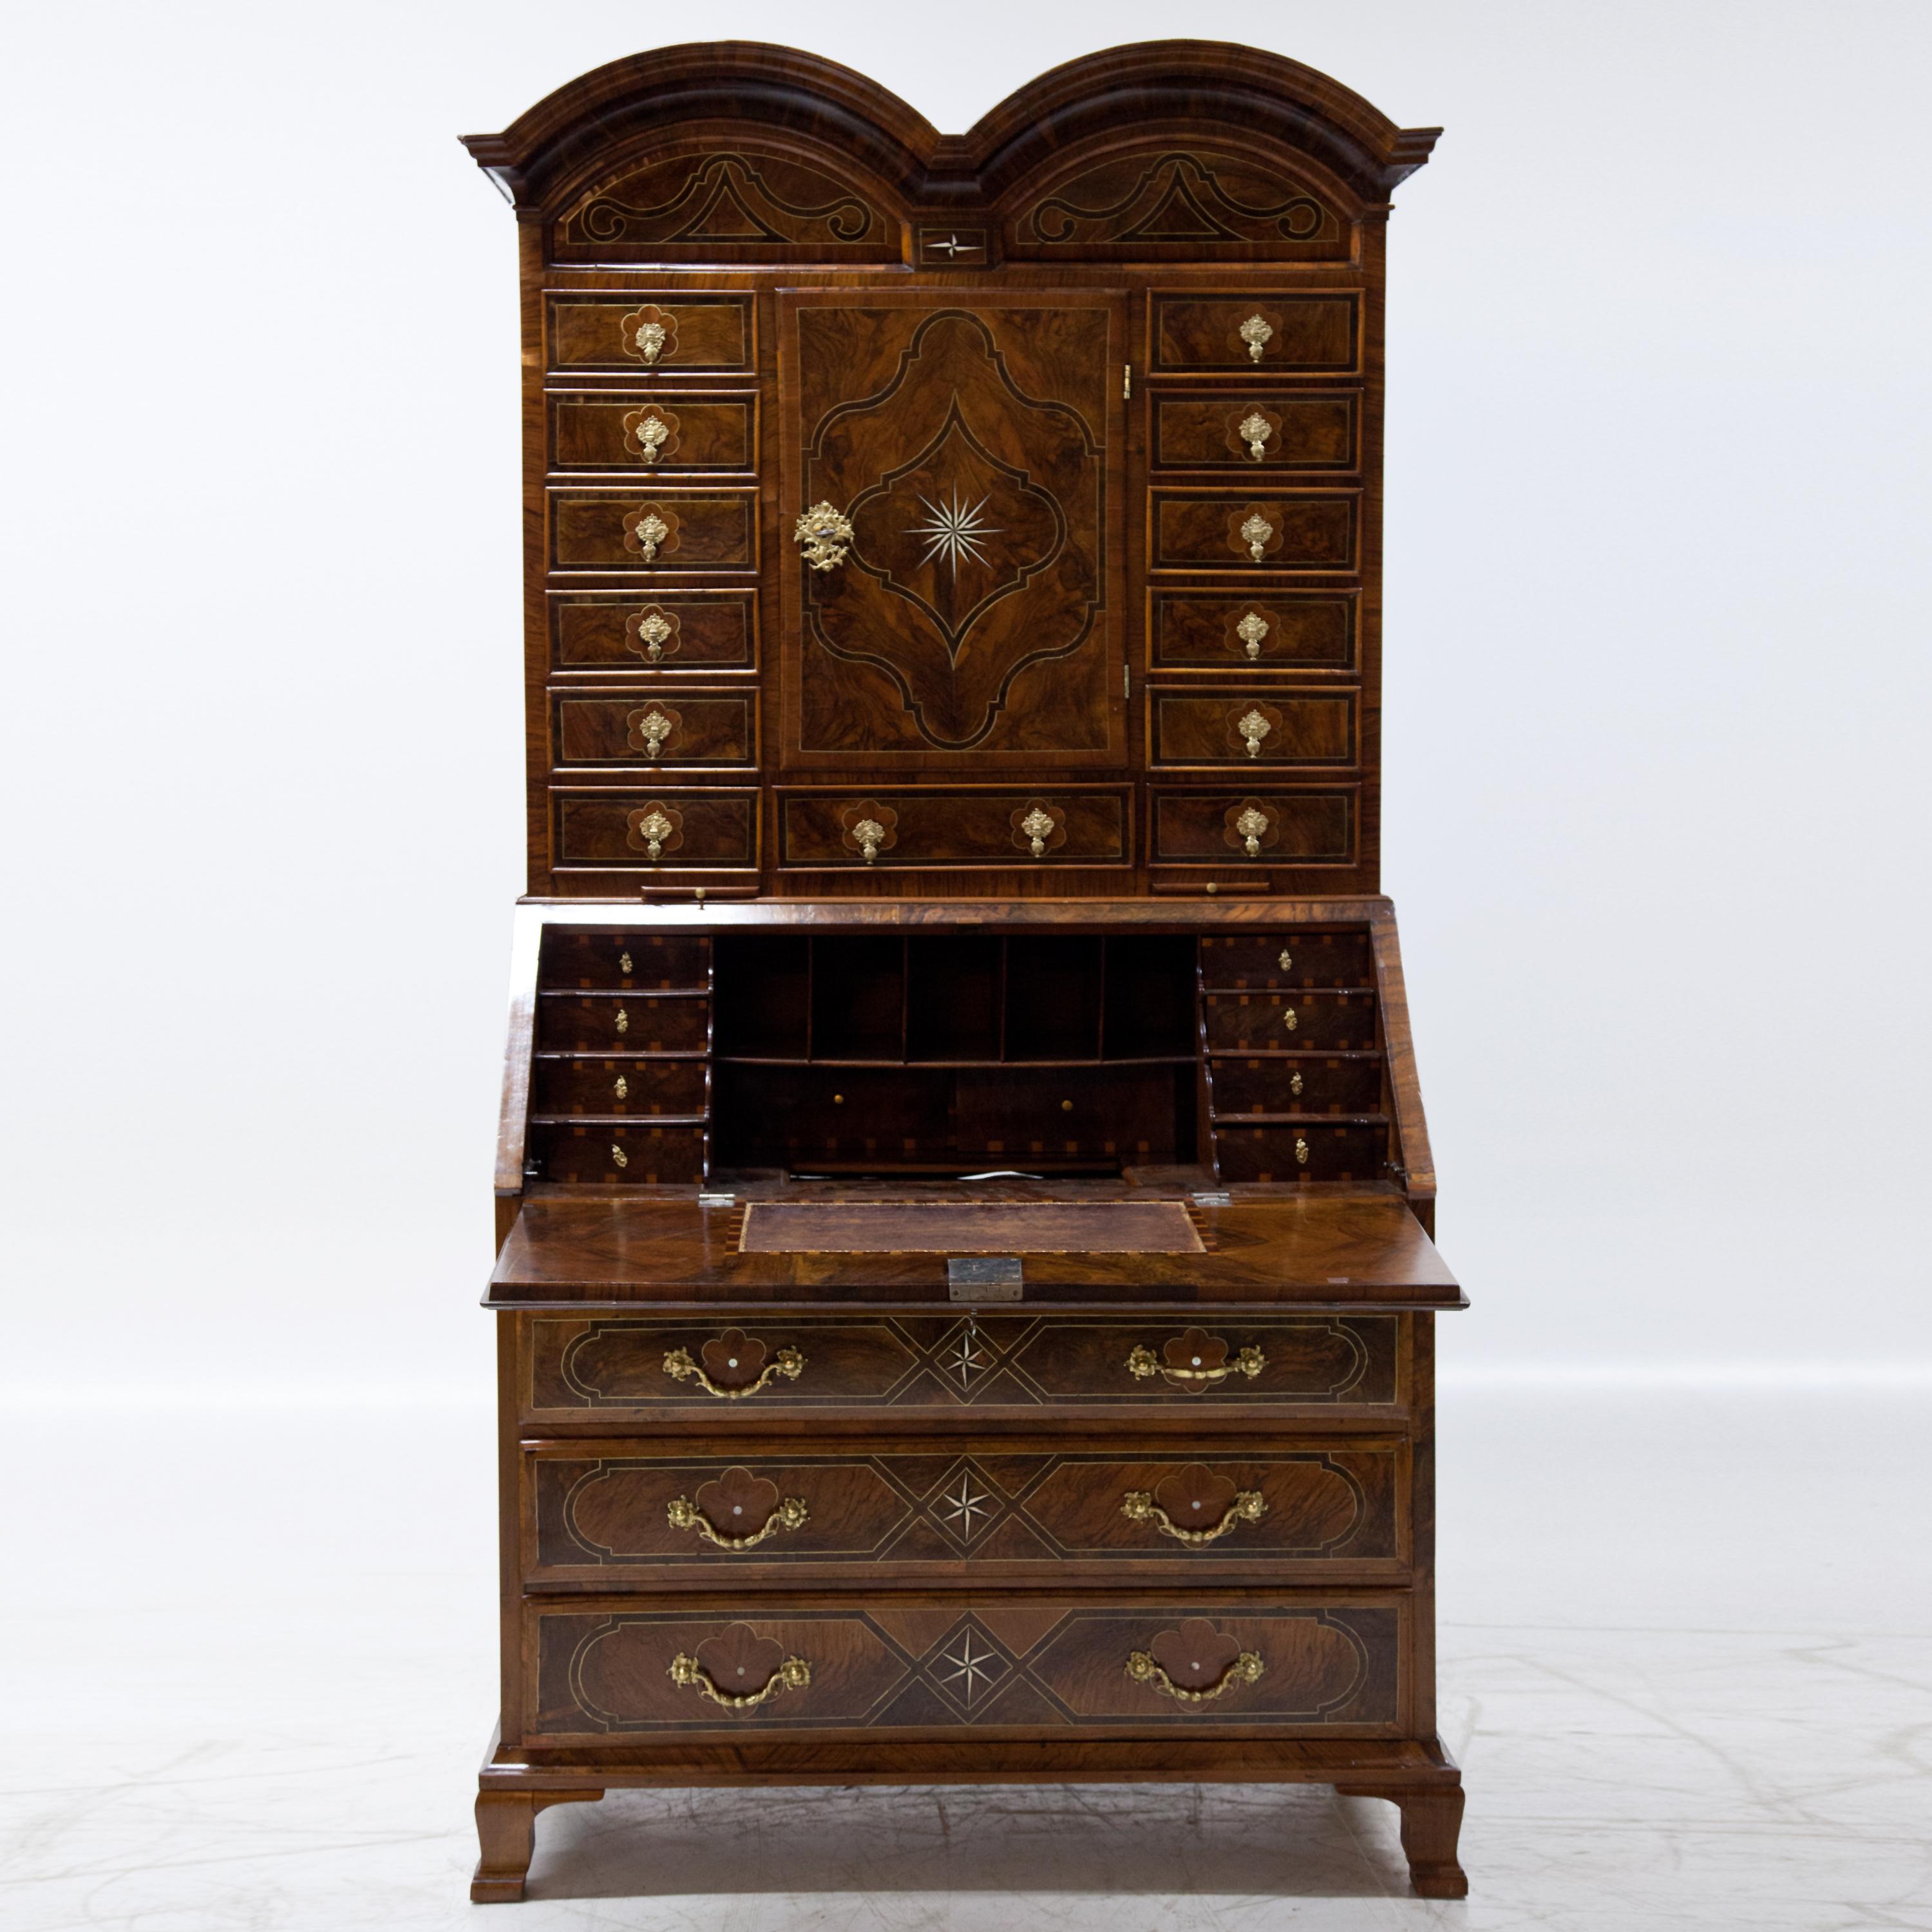 Baroque secretaire on low feet and strictly symmetrical construction. Above the chest of drawers base, there is a writing flap and two pull-out shelves. The interior division is equipped with pigeon holes and small drawers as well as a concealed